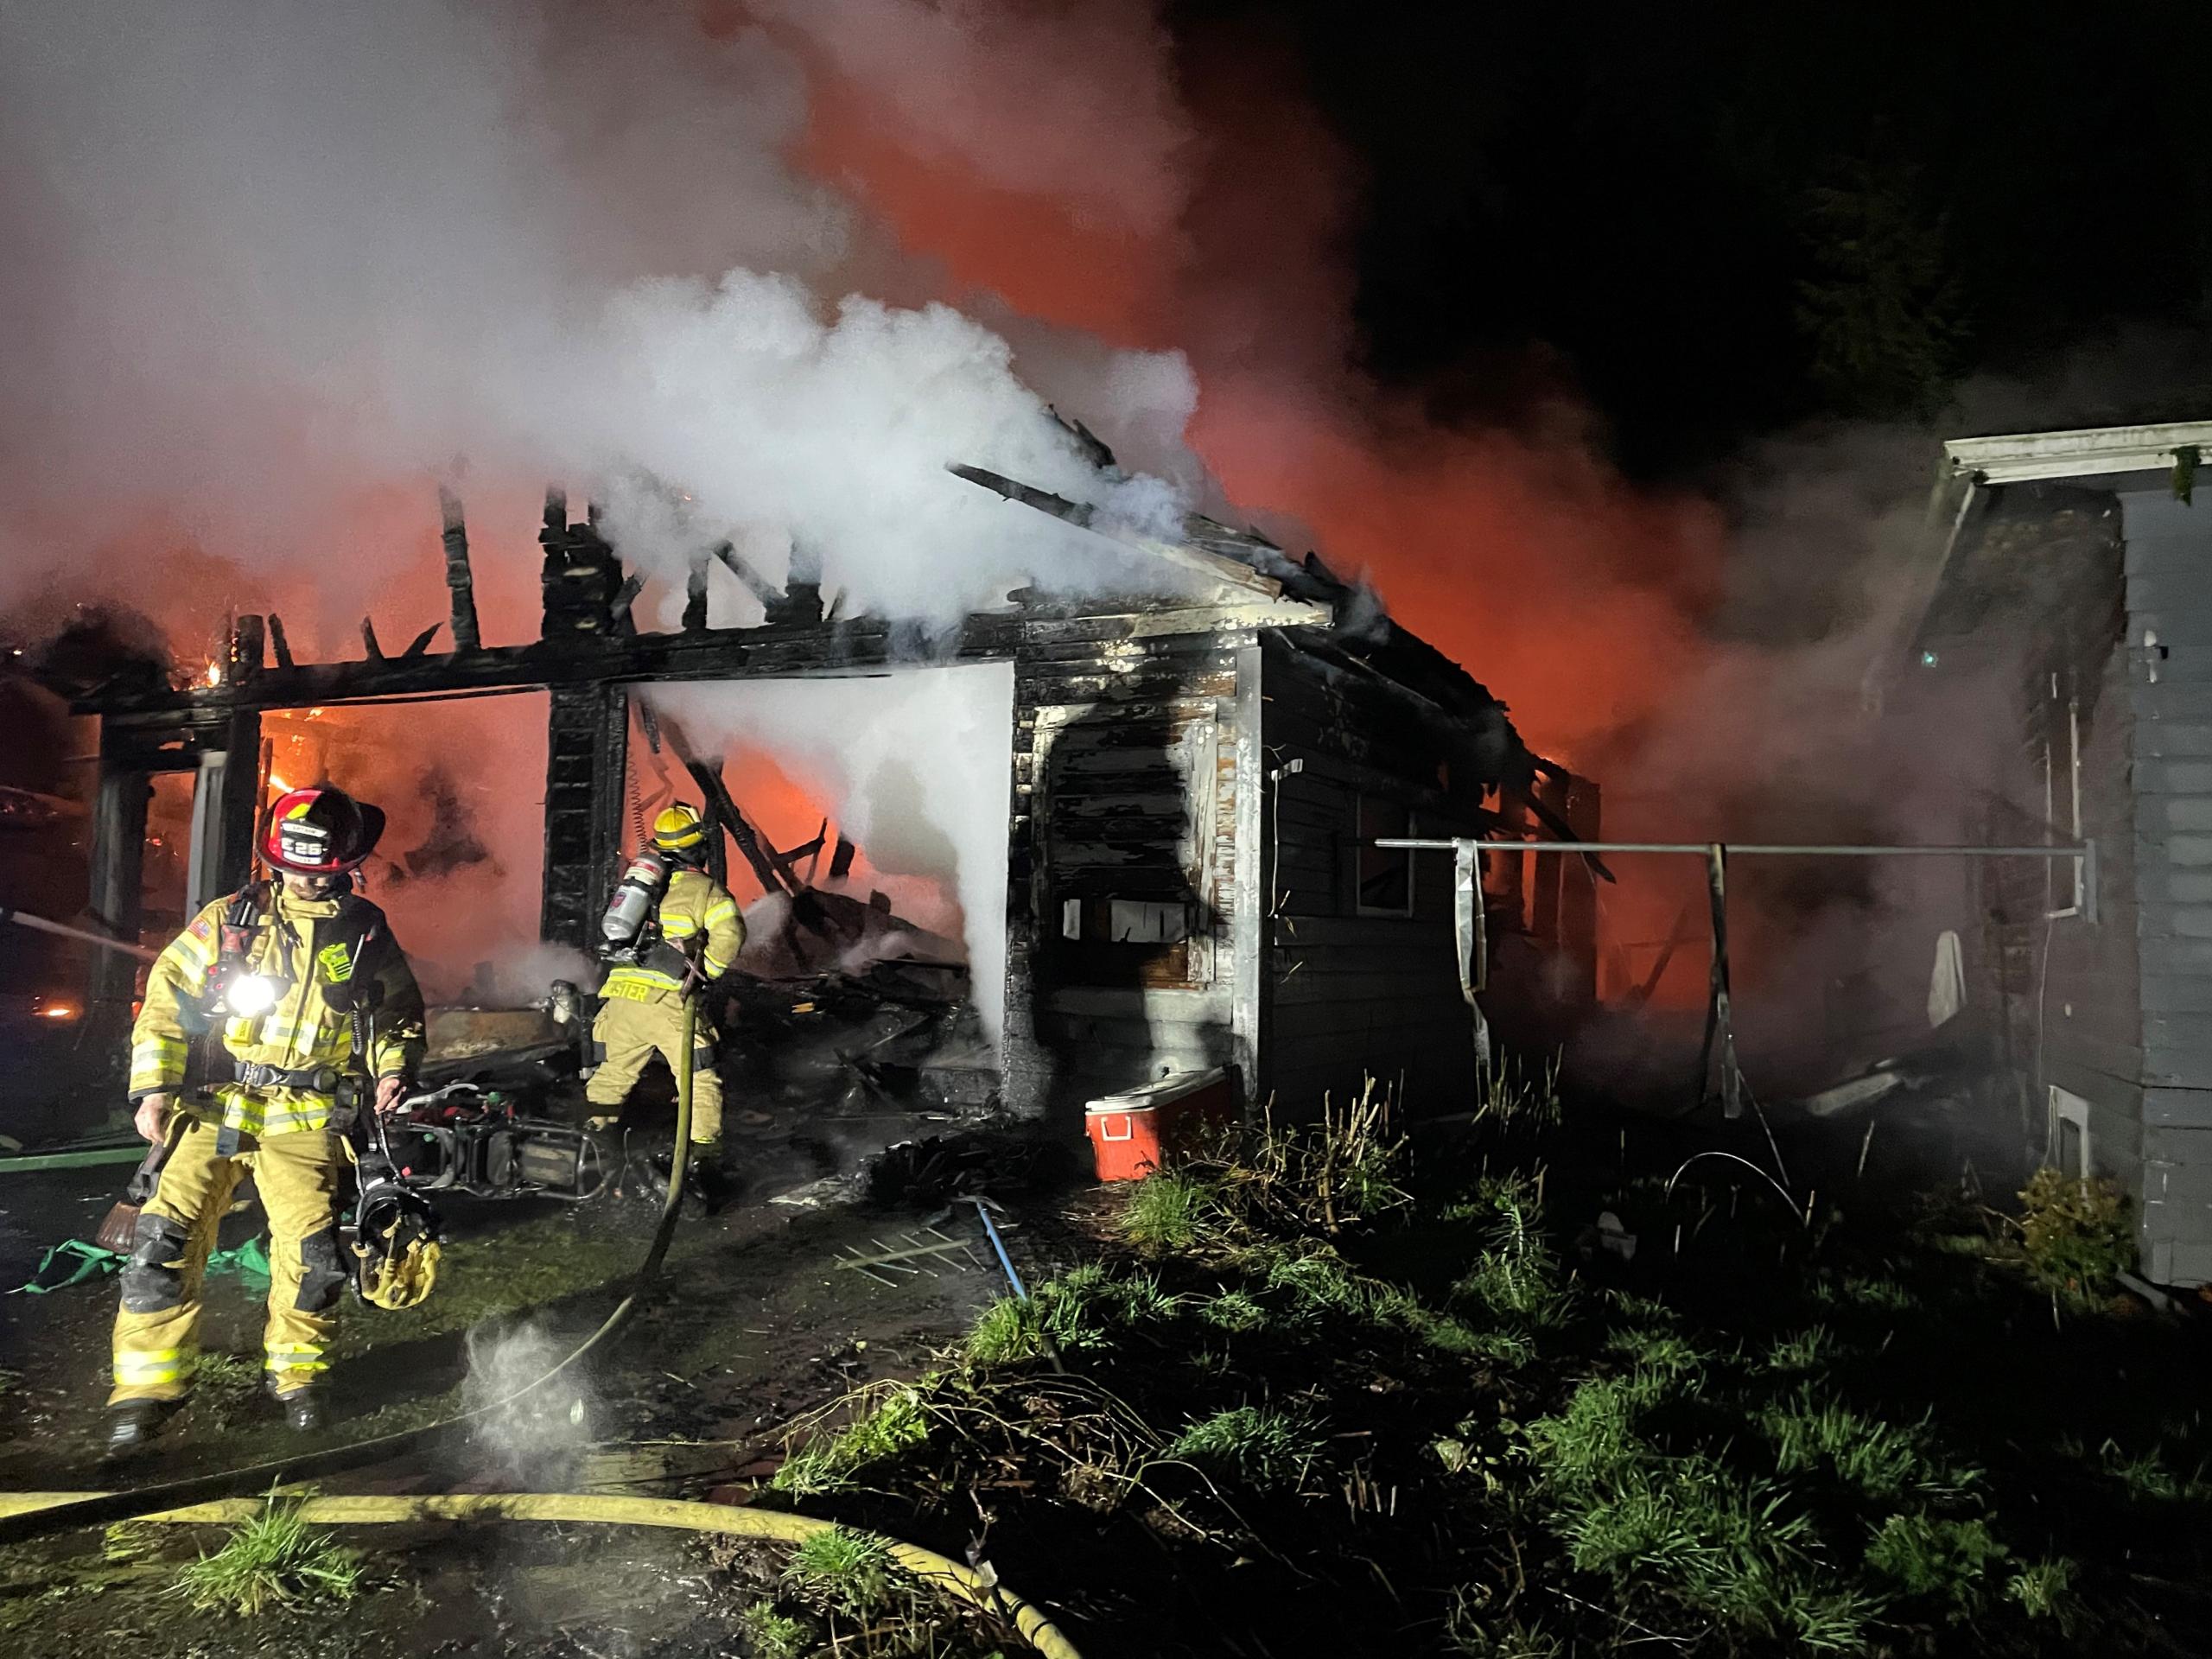 Crews from Clark-Cowlitz Fire Rescue battle a fire that damaged a detached garage and house at 2834 N. Smythe Road in Ridgefield late Monday night.